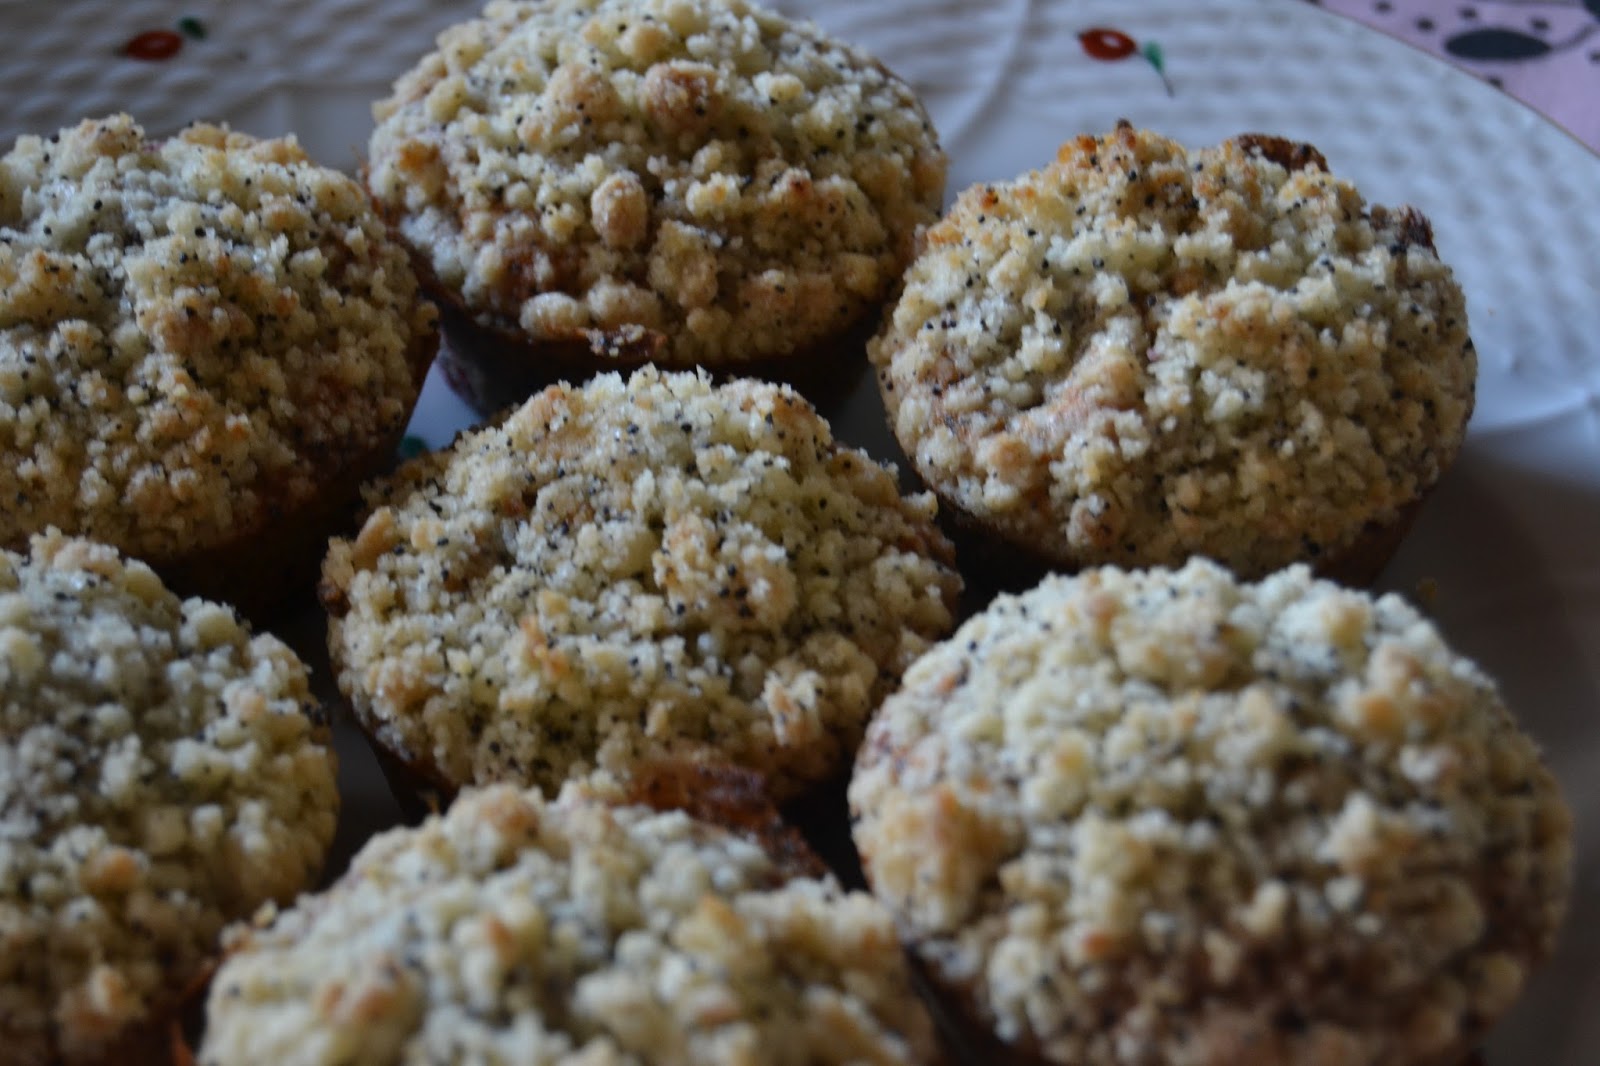 Yummylicious - A Food Blog: [Backen] Himbeer Mohn Muffins mit Streusel ...